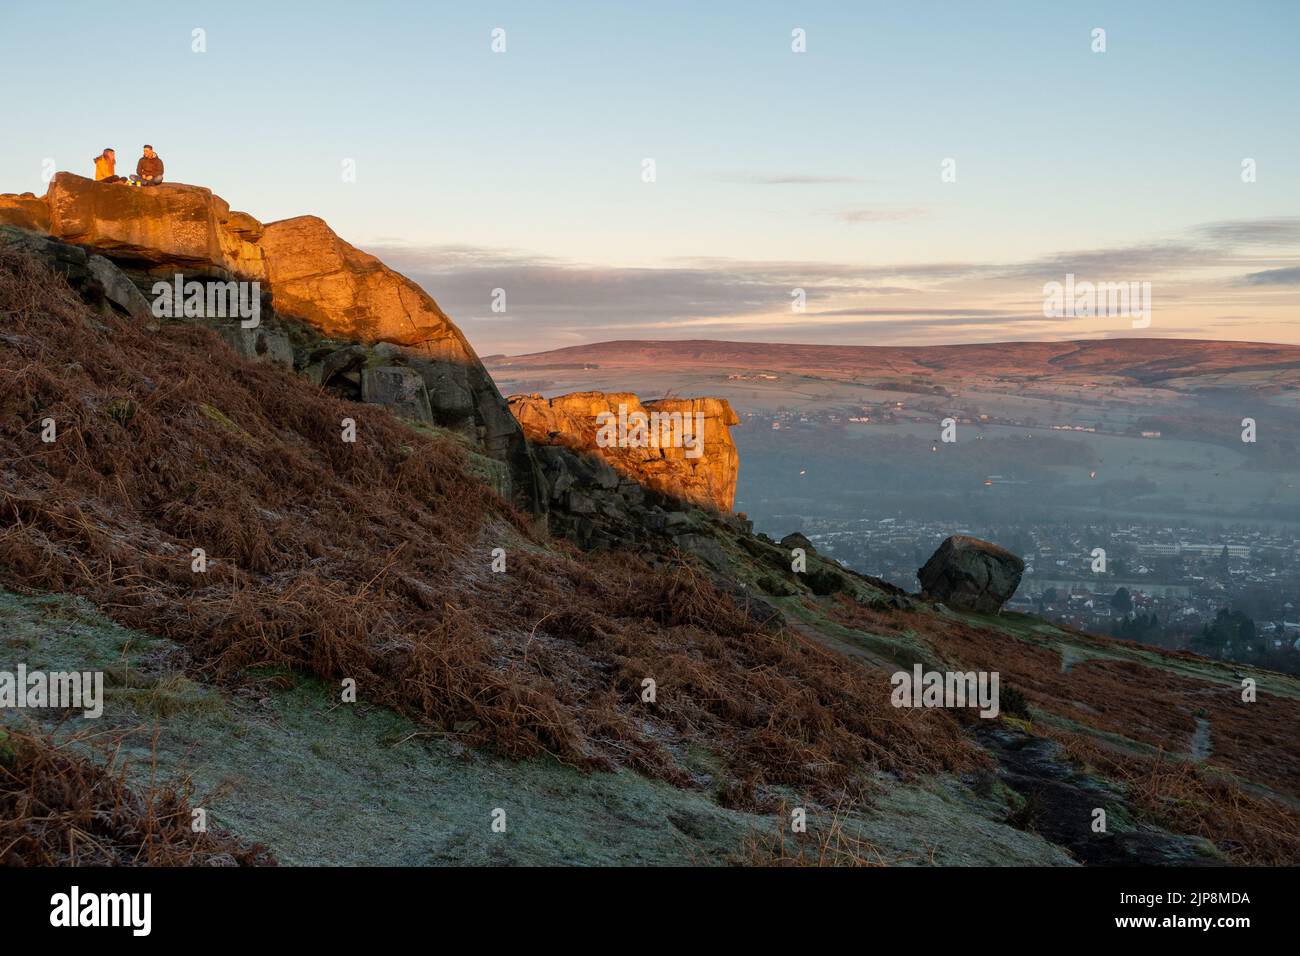 Couple enjoying a hot drink at sunrise at the Cow and Calf Rocks, Ilkley Moor, England. Stock Photo